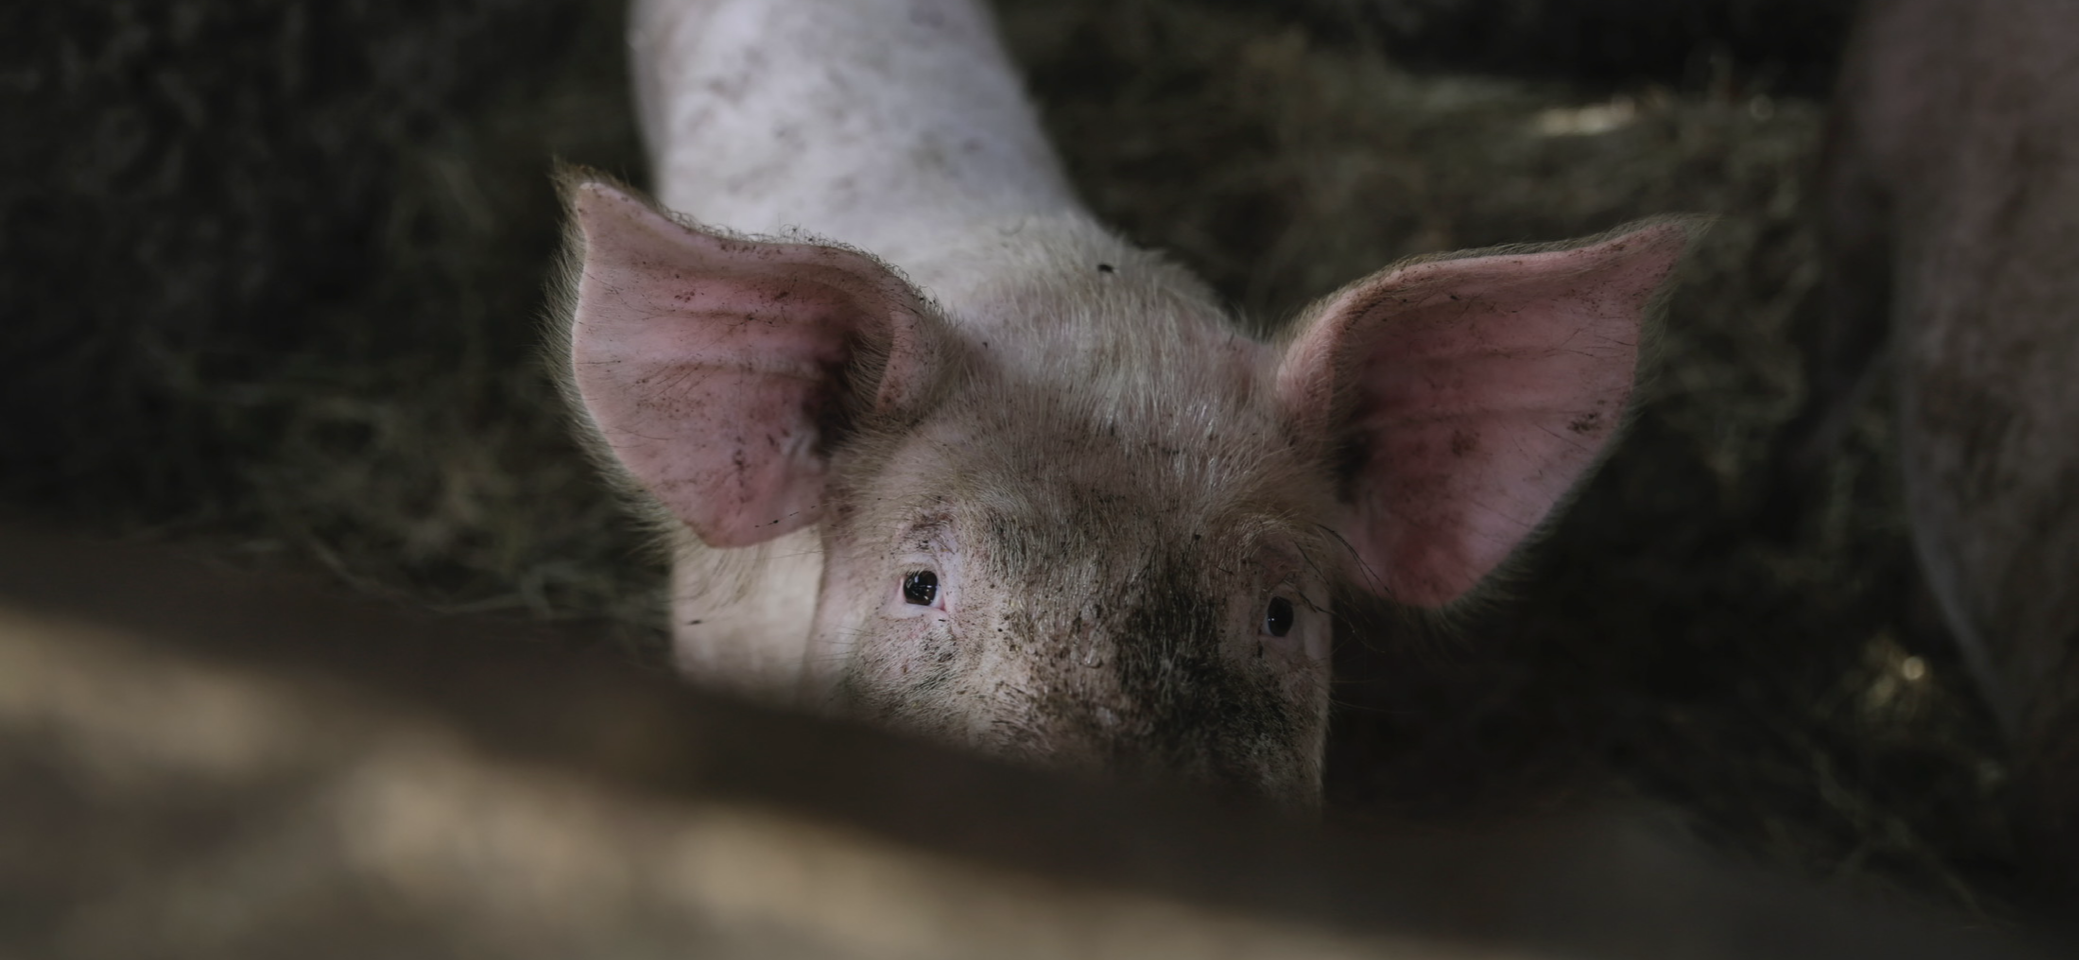 An image of a dirty pig in a muddy pen